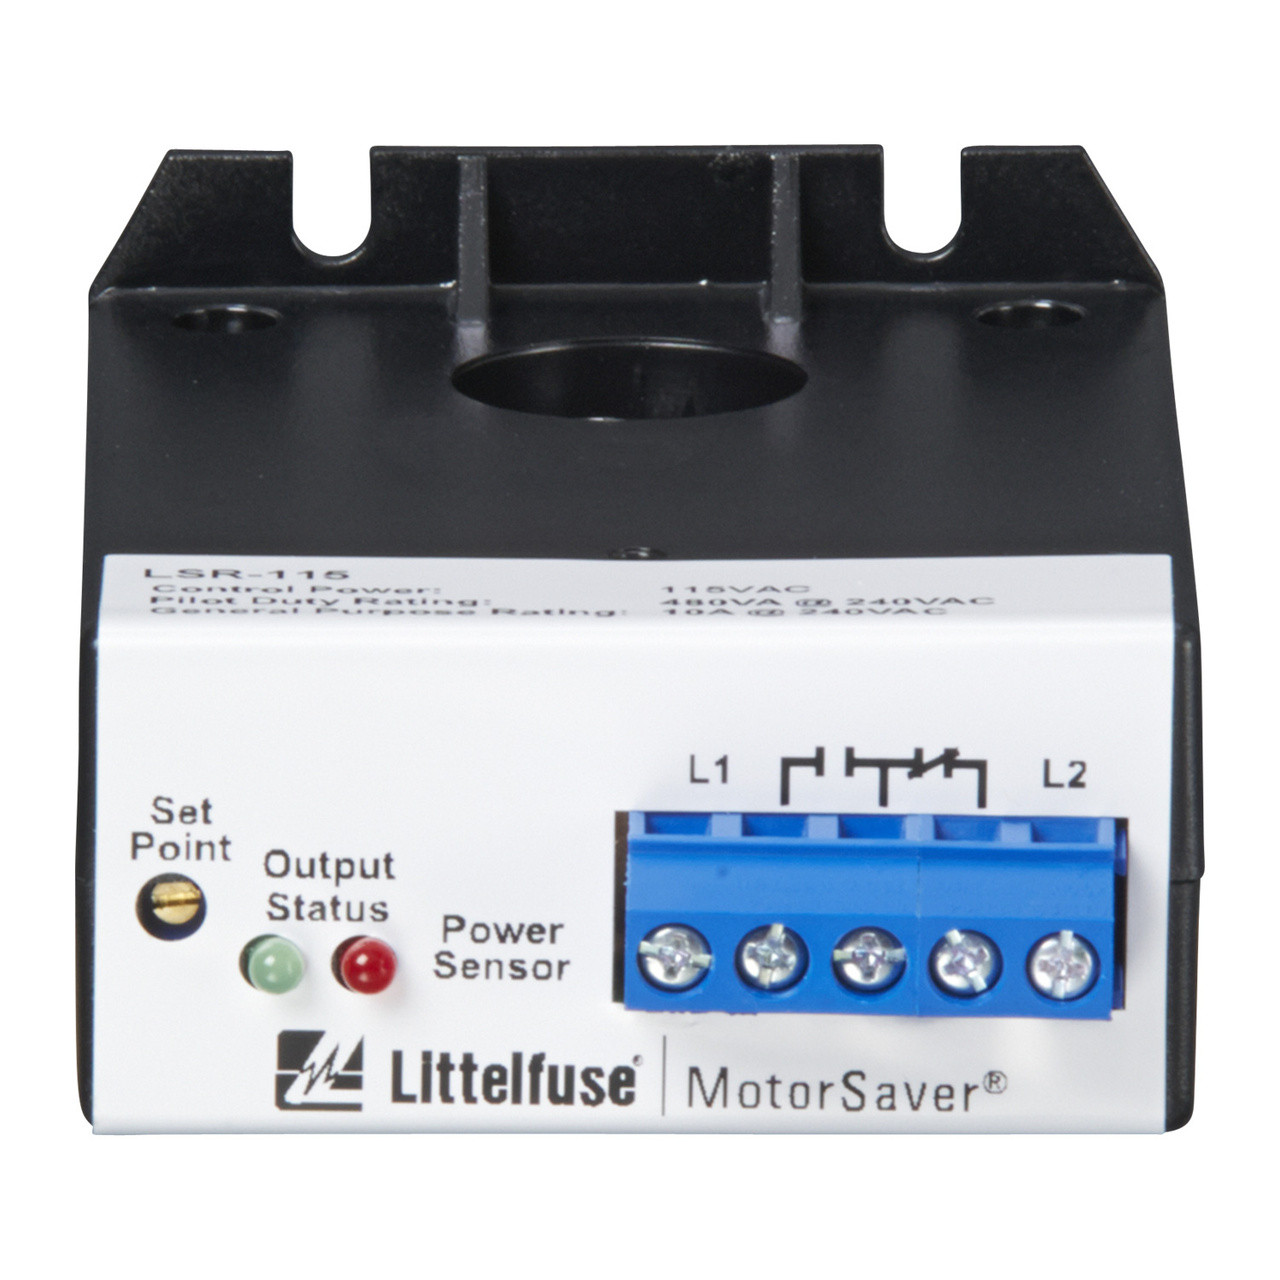 Littelfuse-Symcom LSR-115 Current Monitor Relays